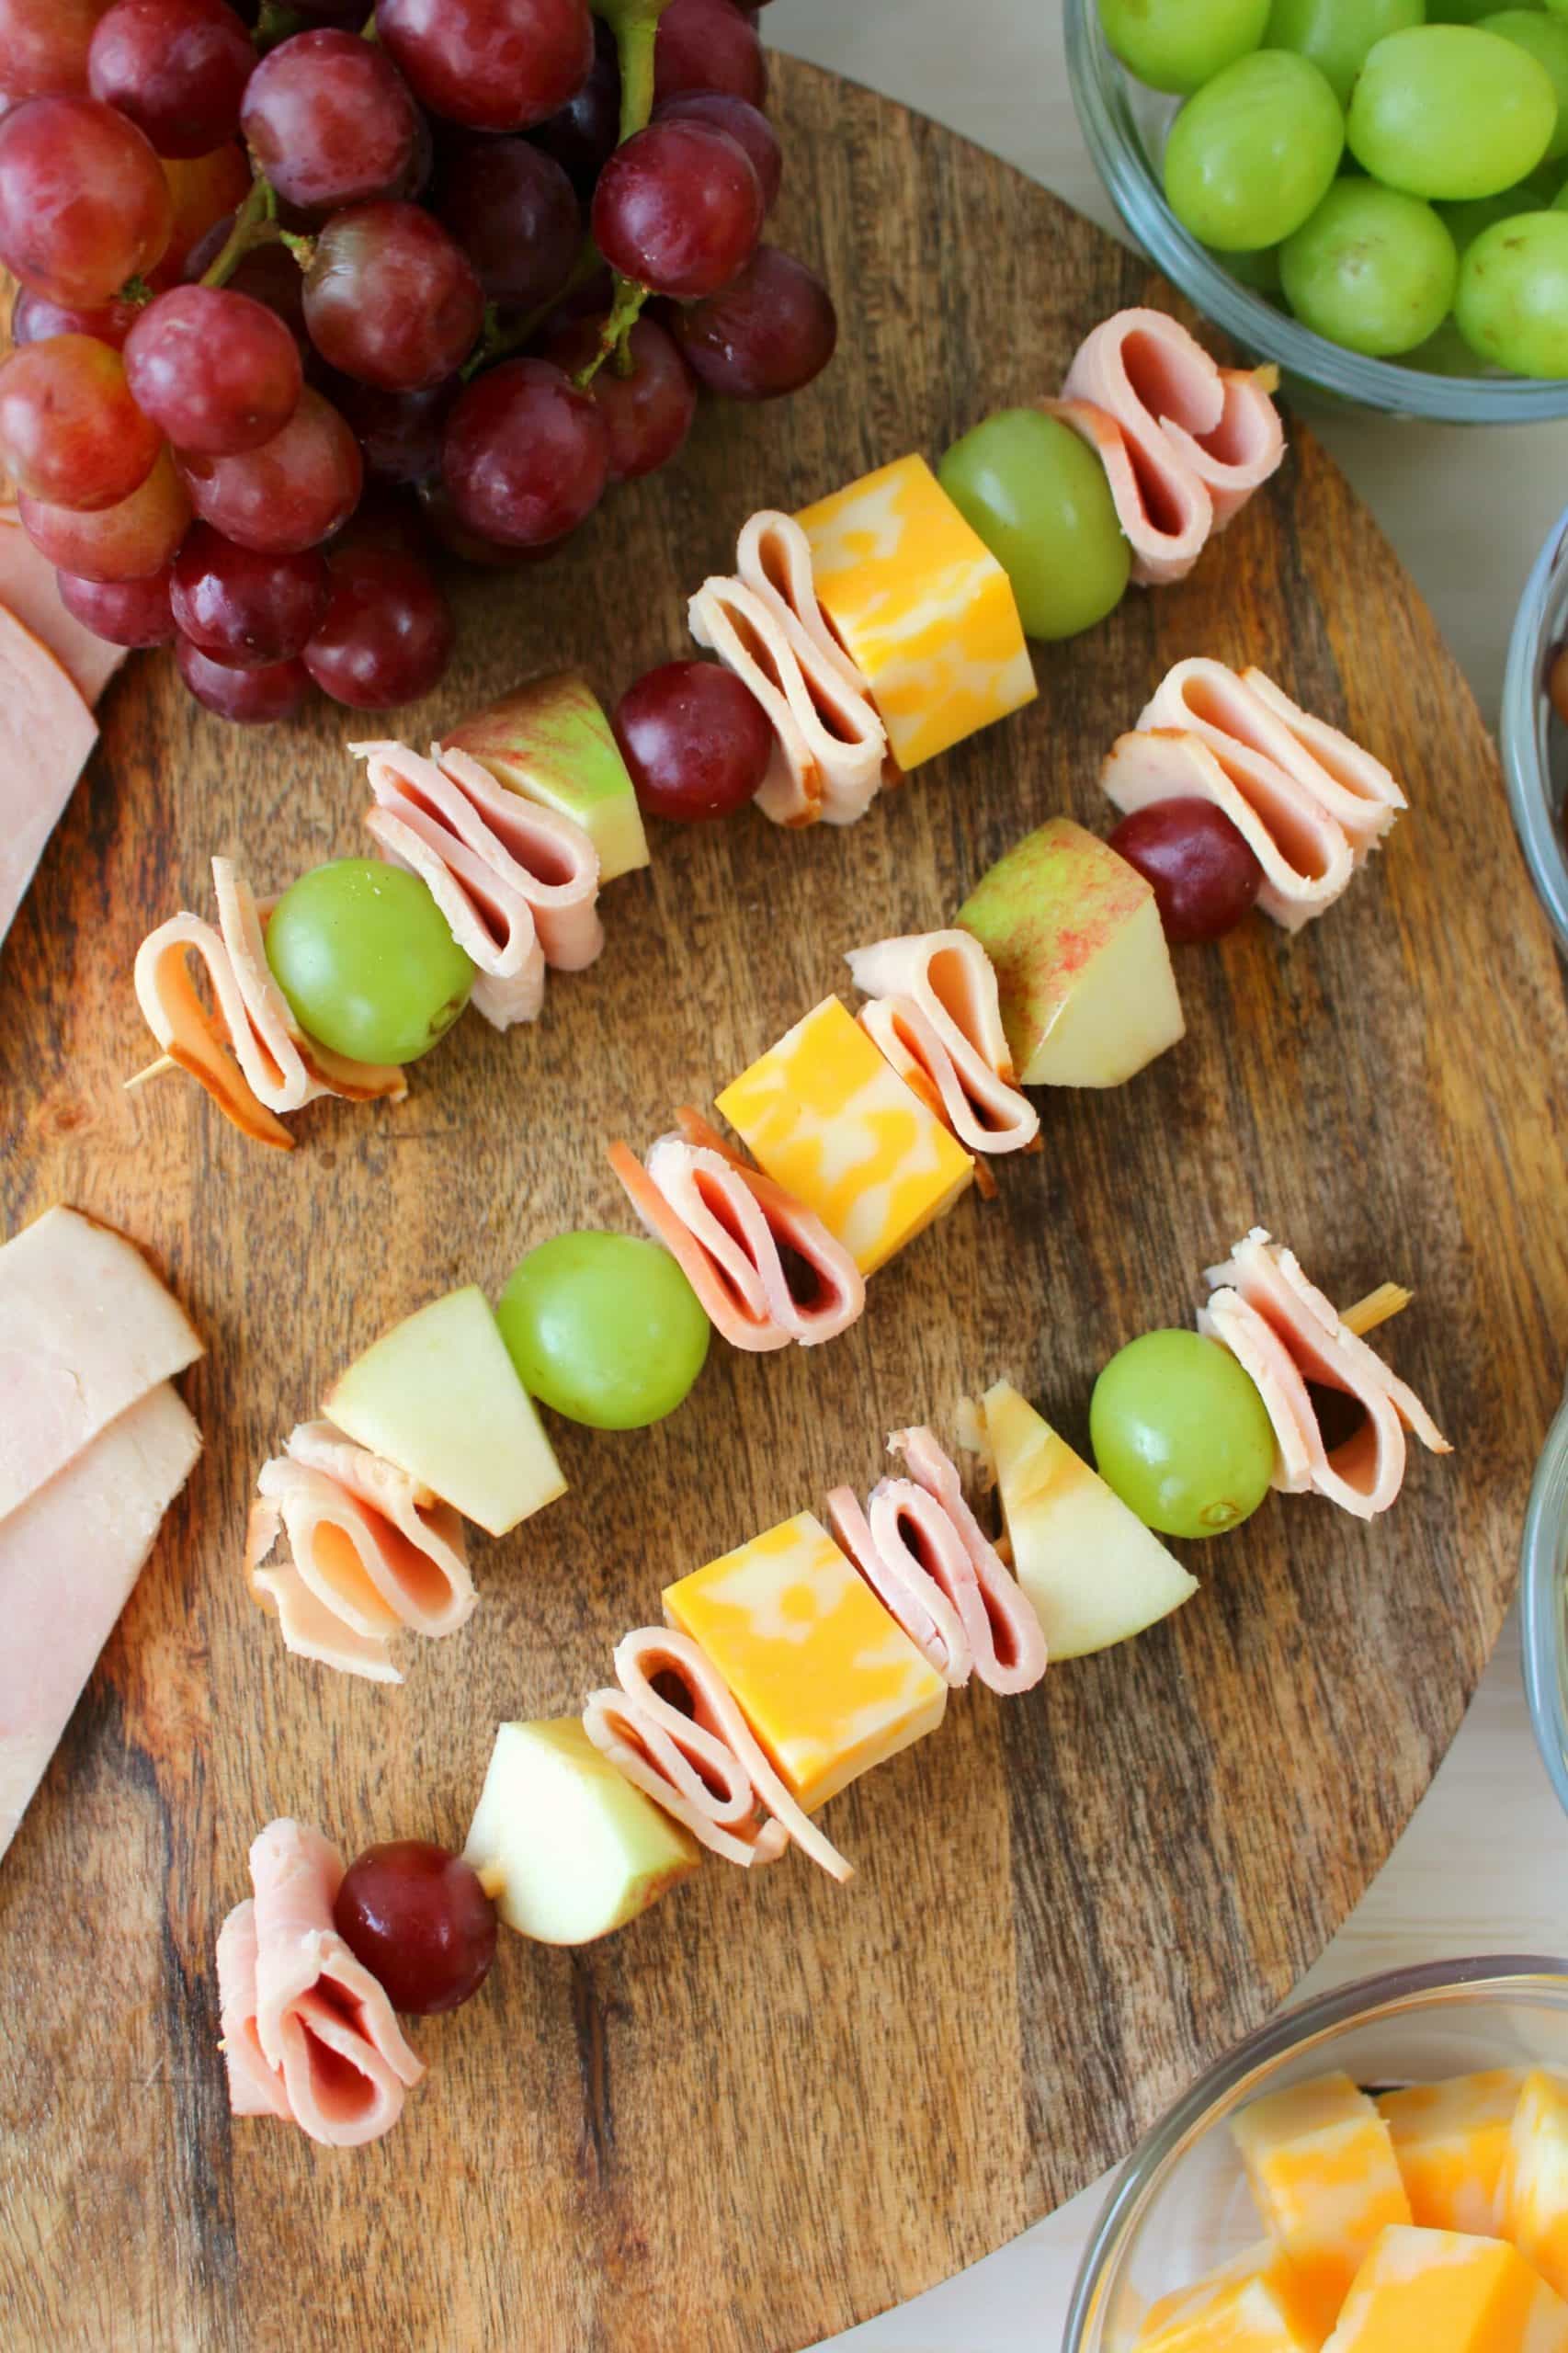 Looking for something new to pack for school lunches? These fun and easy Lunchbox Turkey & Ham Skewers will have your kids jumping for joy at lunch time! Loaded with sliced turkey, ham, fruit and cheese, these will be your kids new lunchbox favorite!